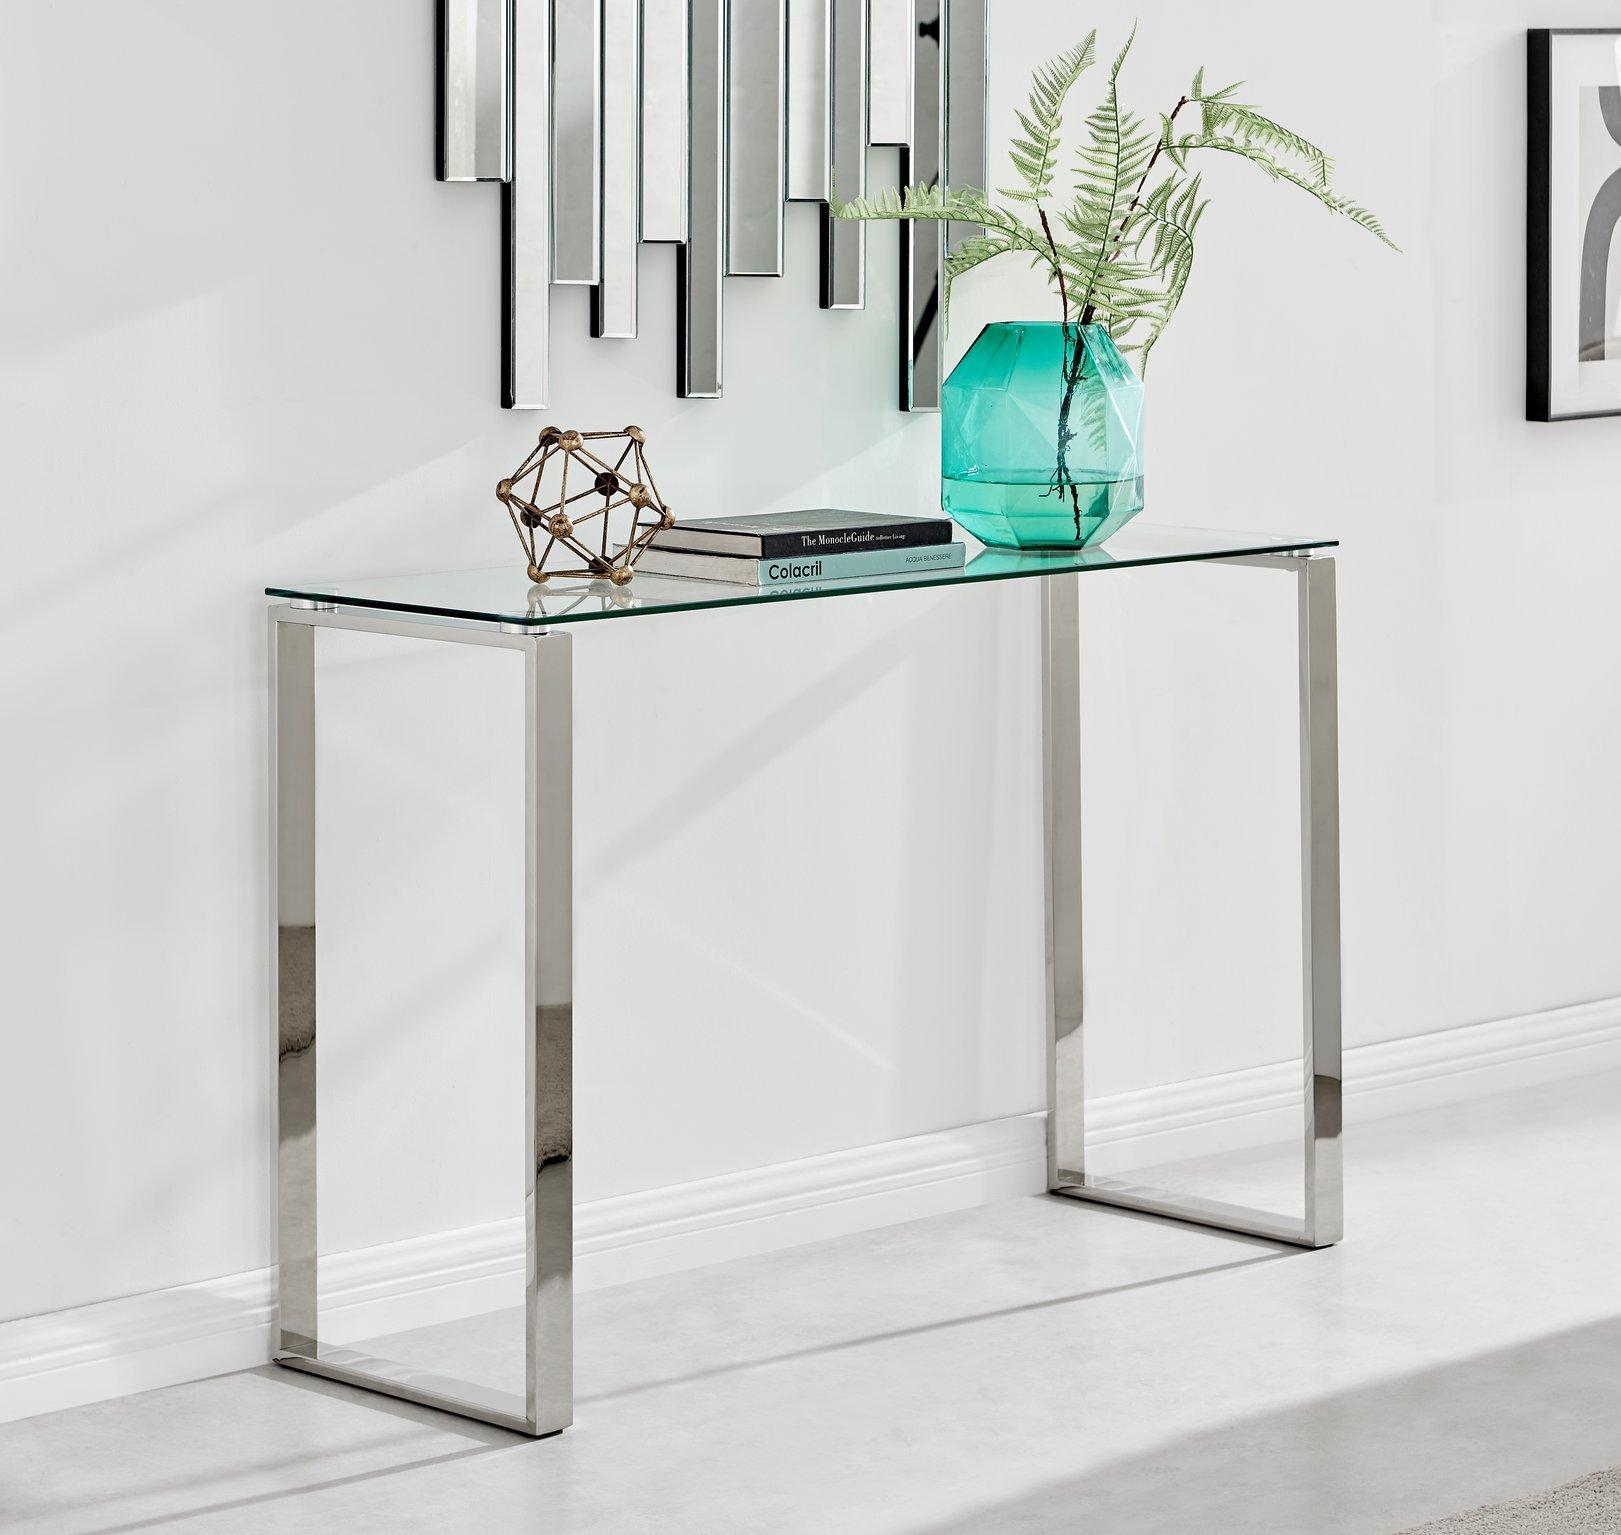 Miami Modern Rectangular Clear Glass Console Table with Square Silver Chrome Metal Legs for Minimali